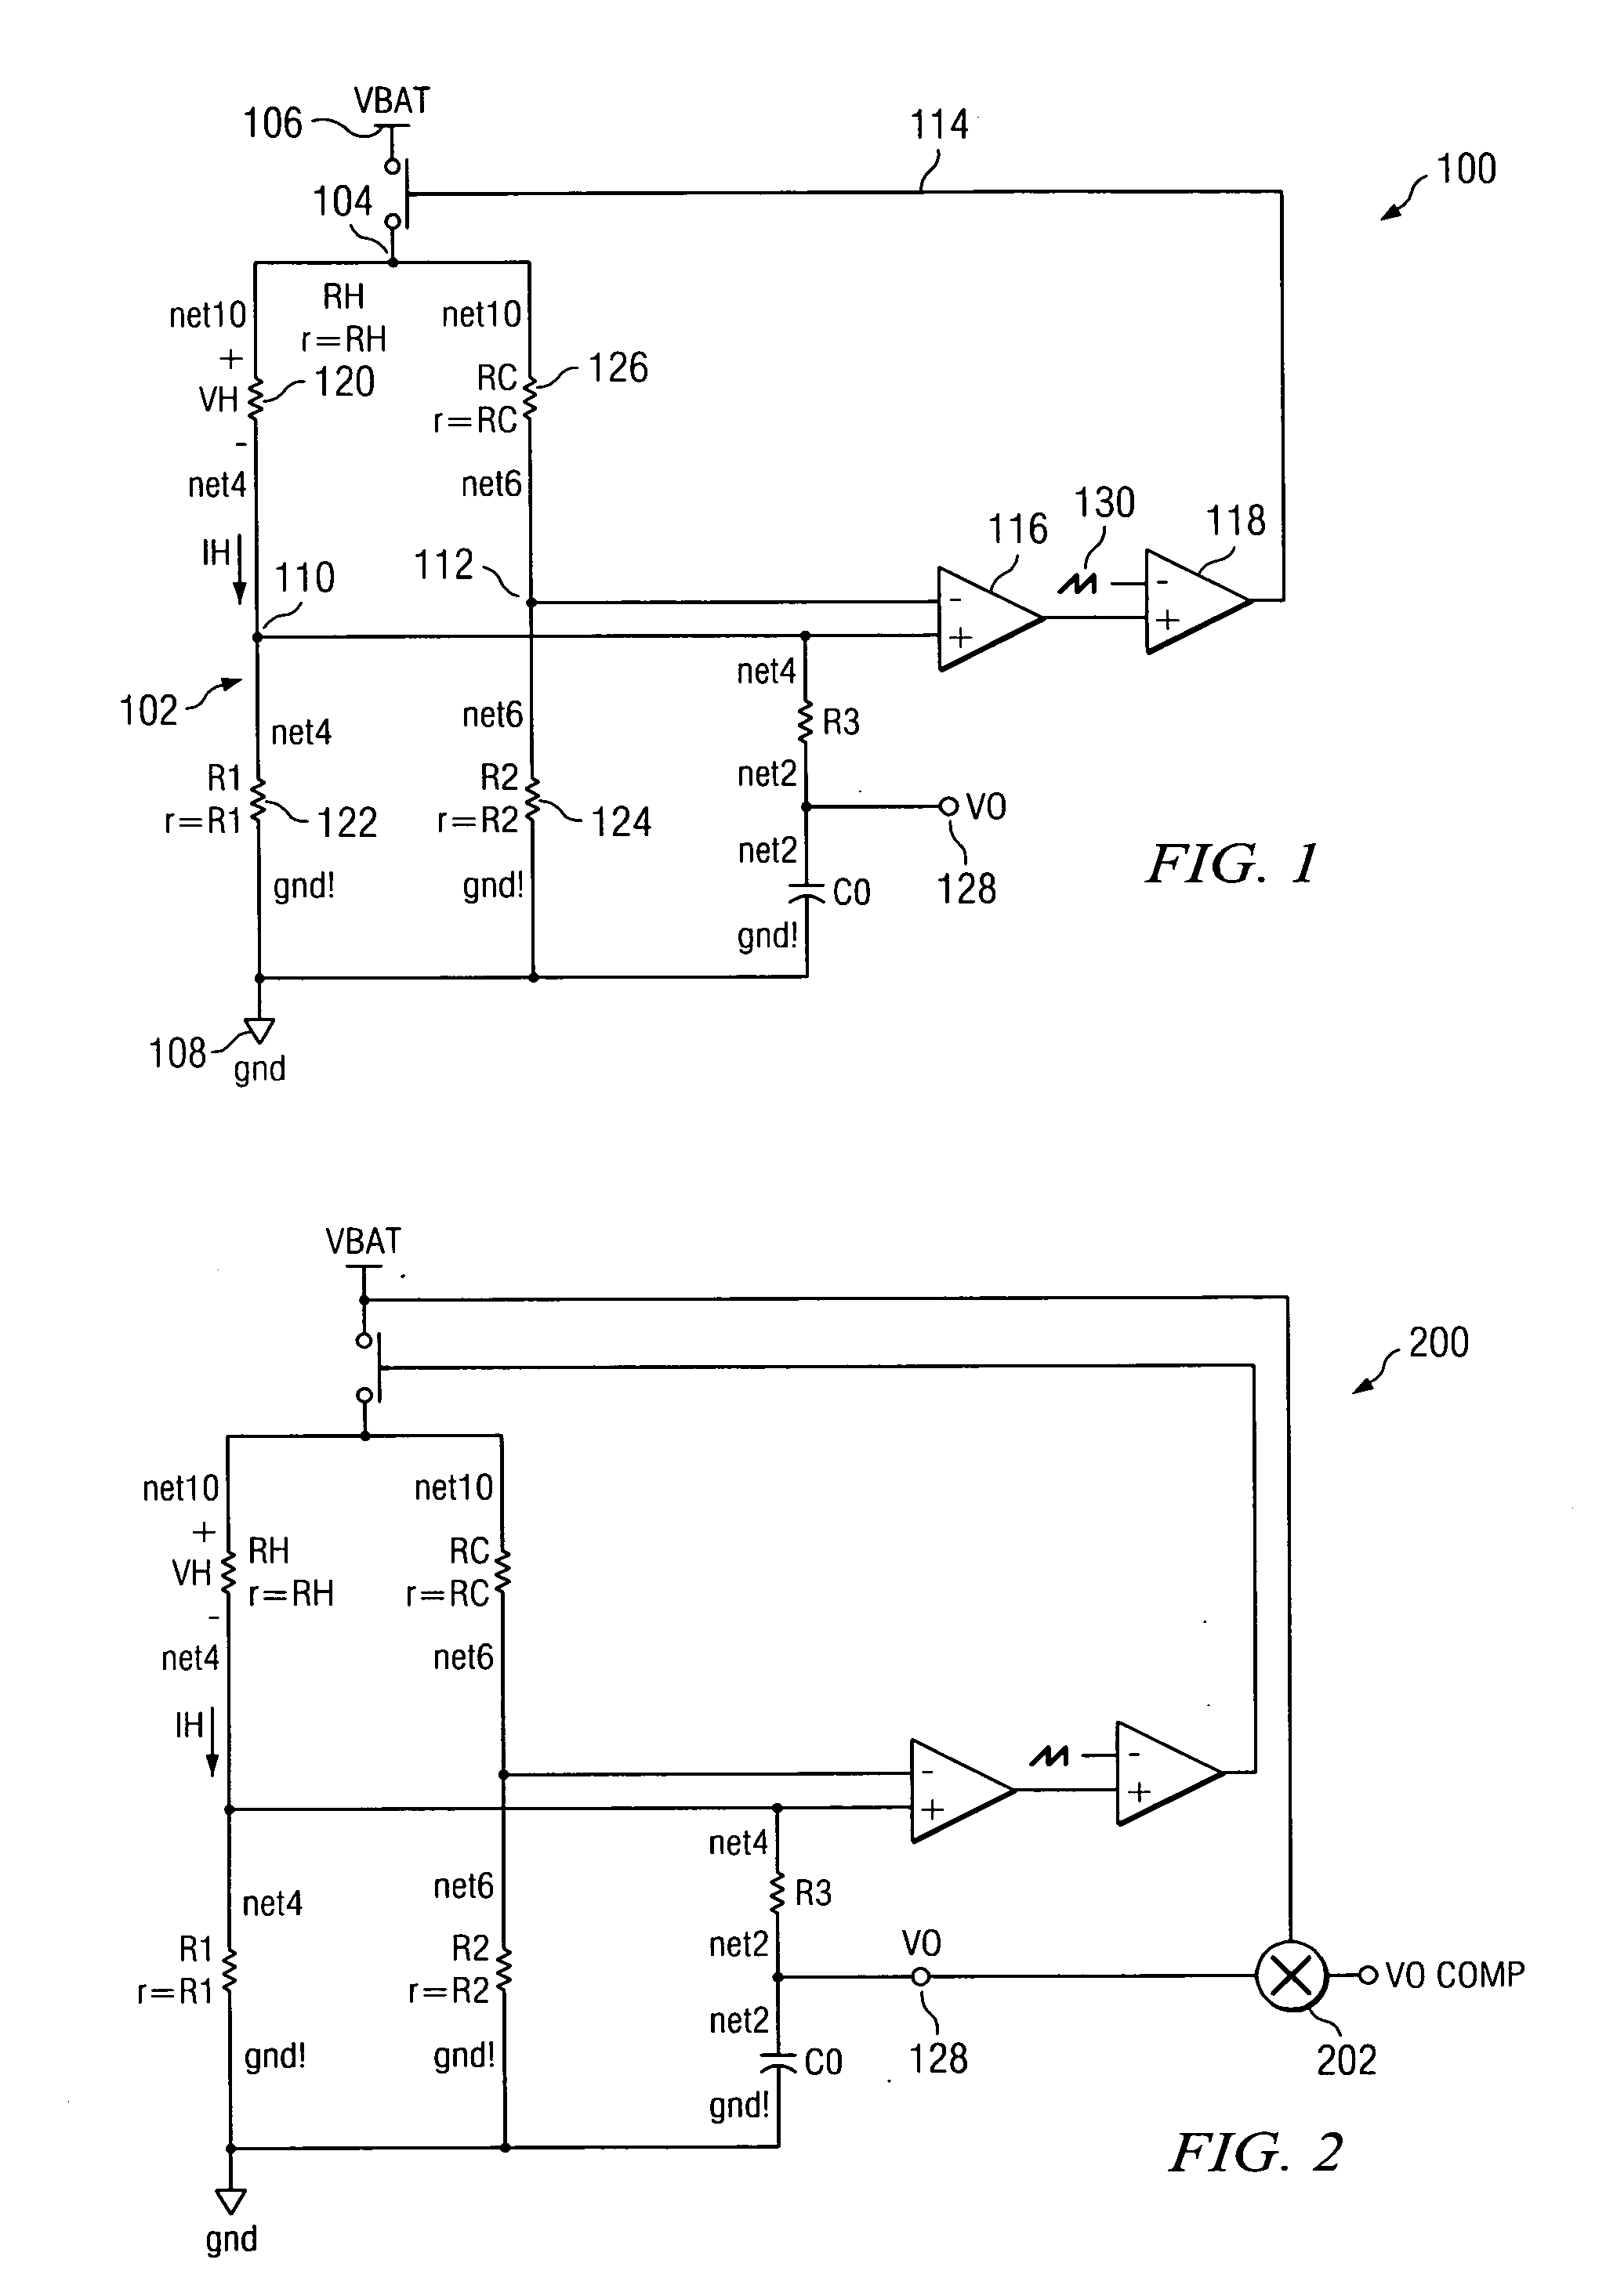 Method of regulating resistance in a discontinuous time hot-wire anemometer